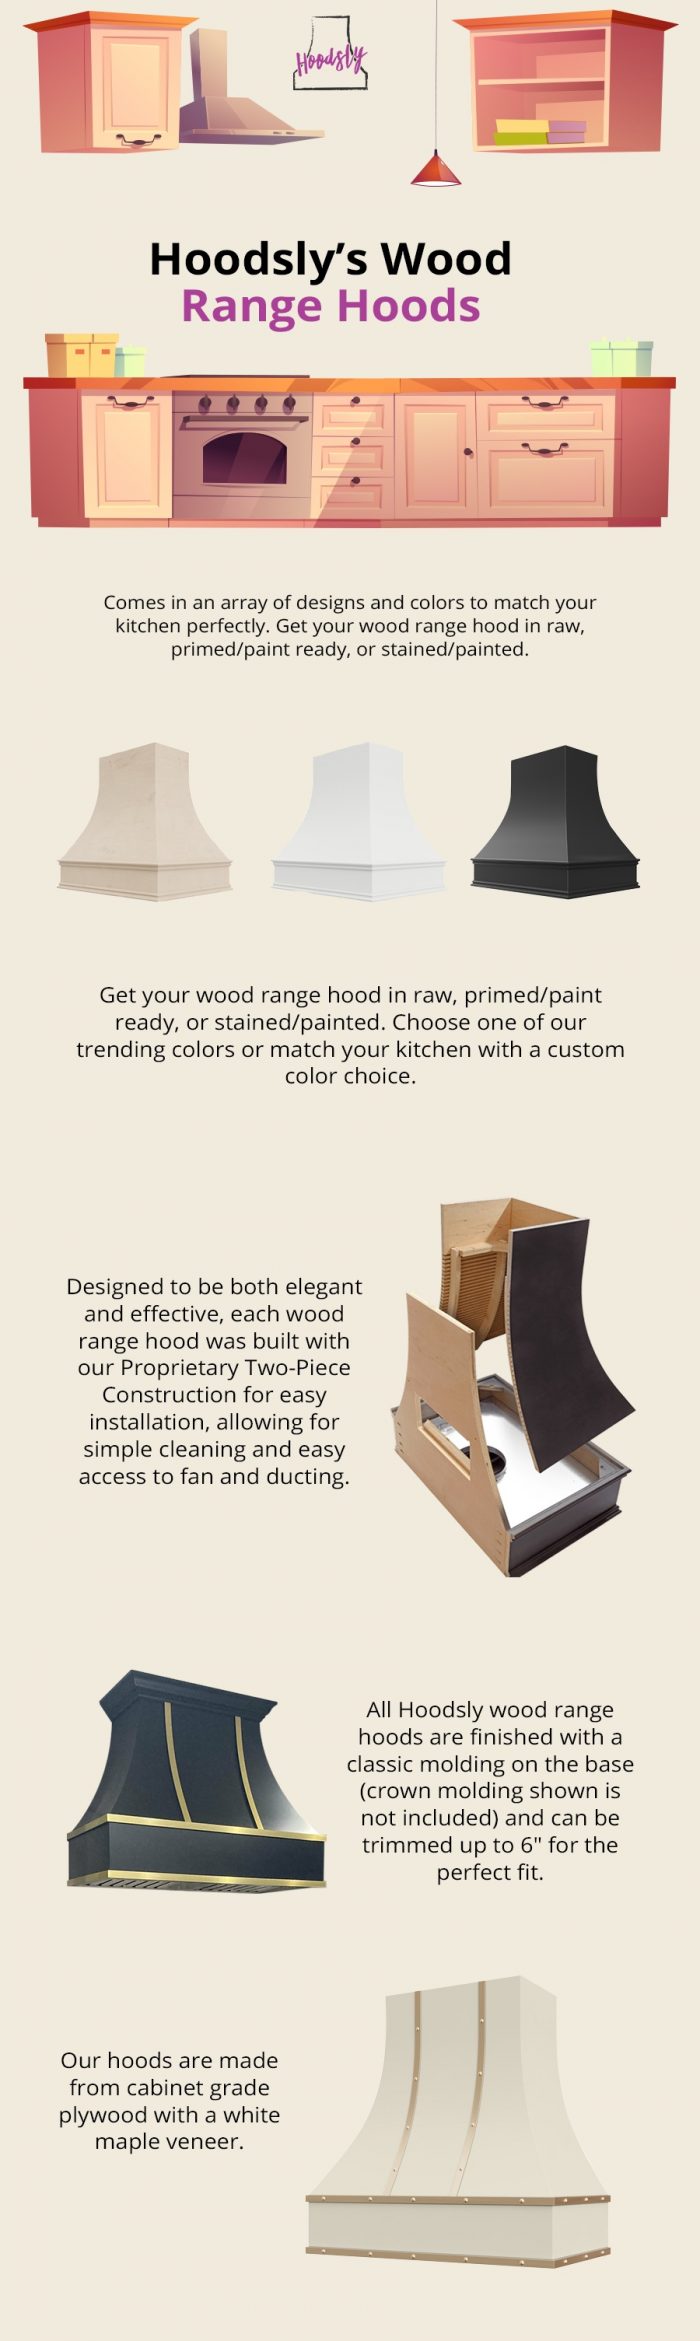 Find the Perfect Wood Range Hood for Your Kitchen from Hoodsly